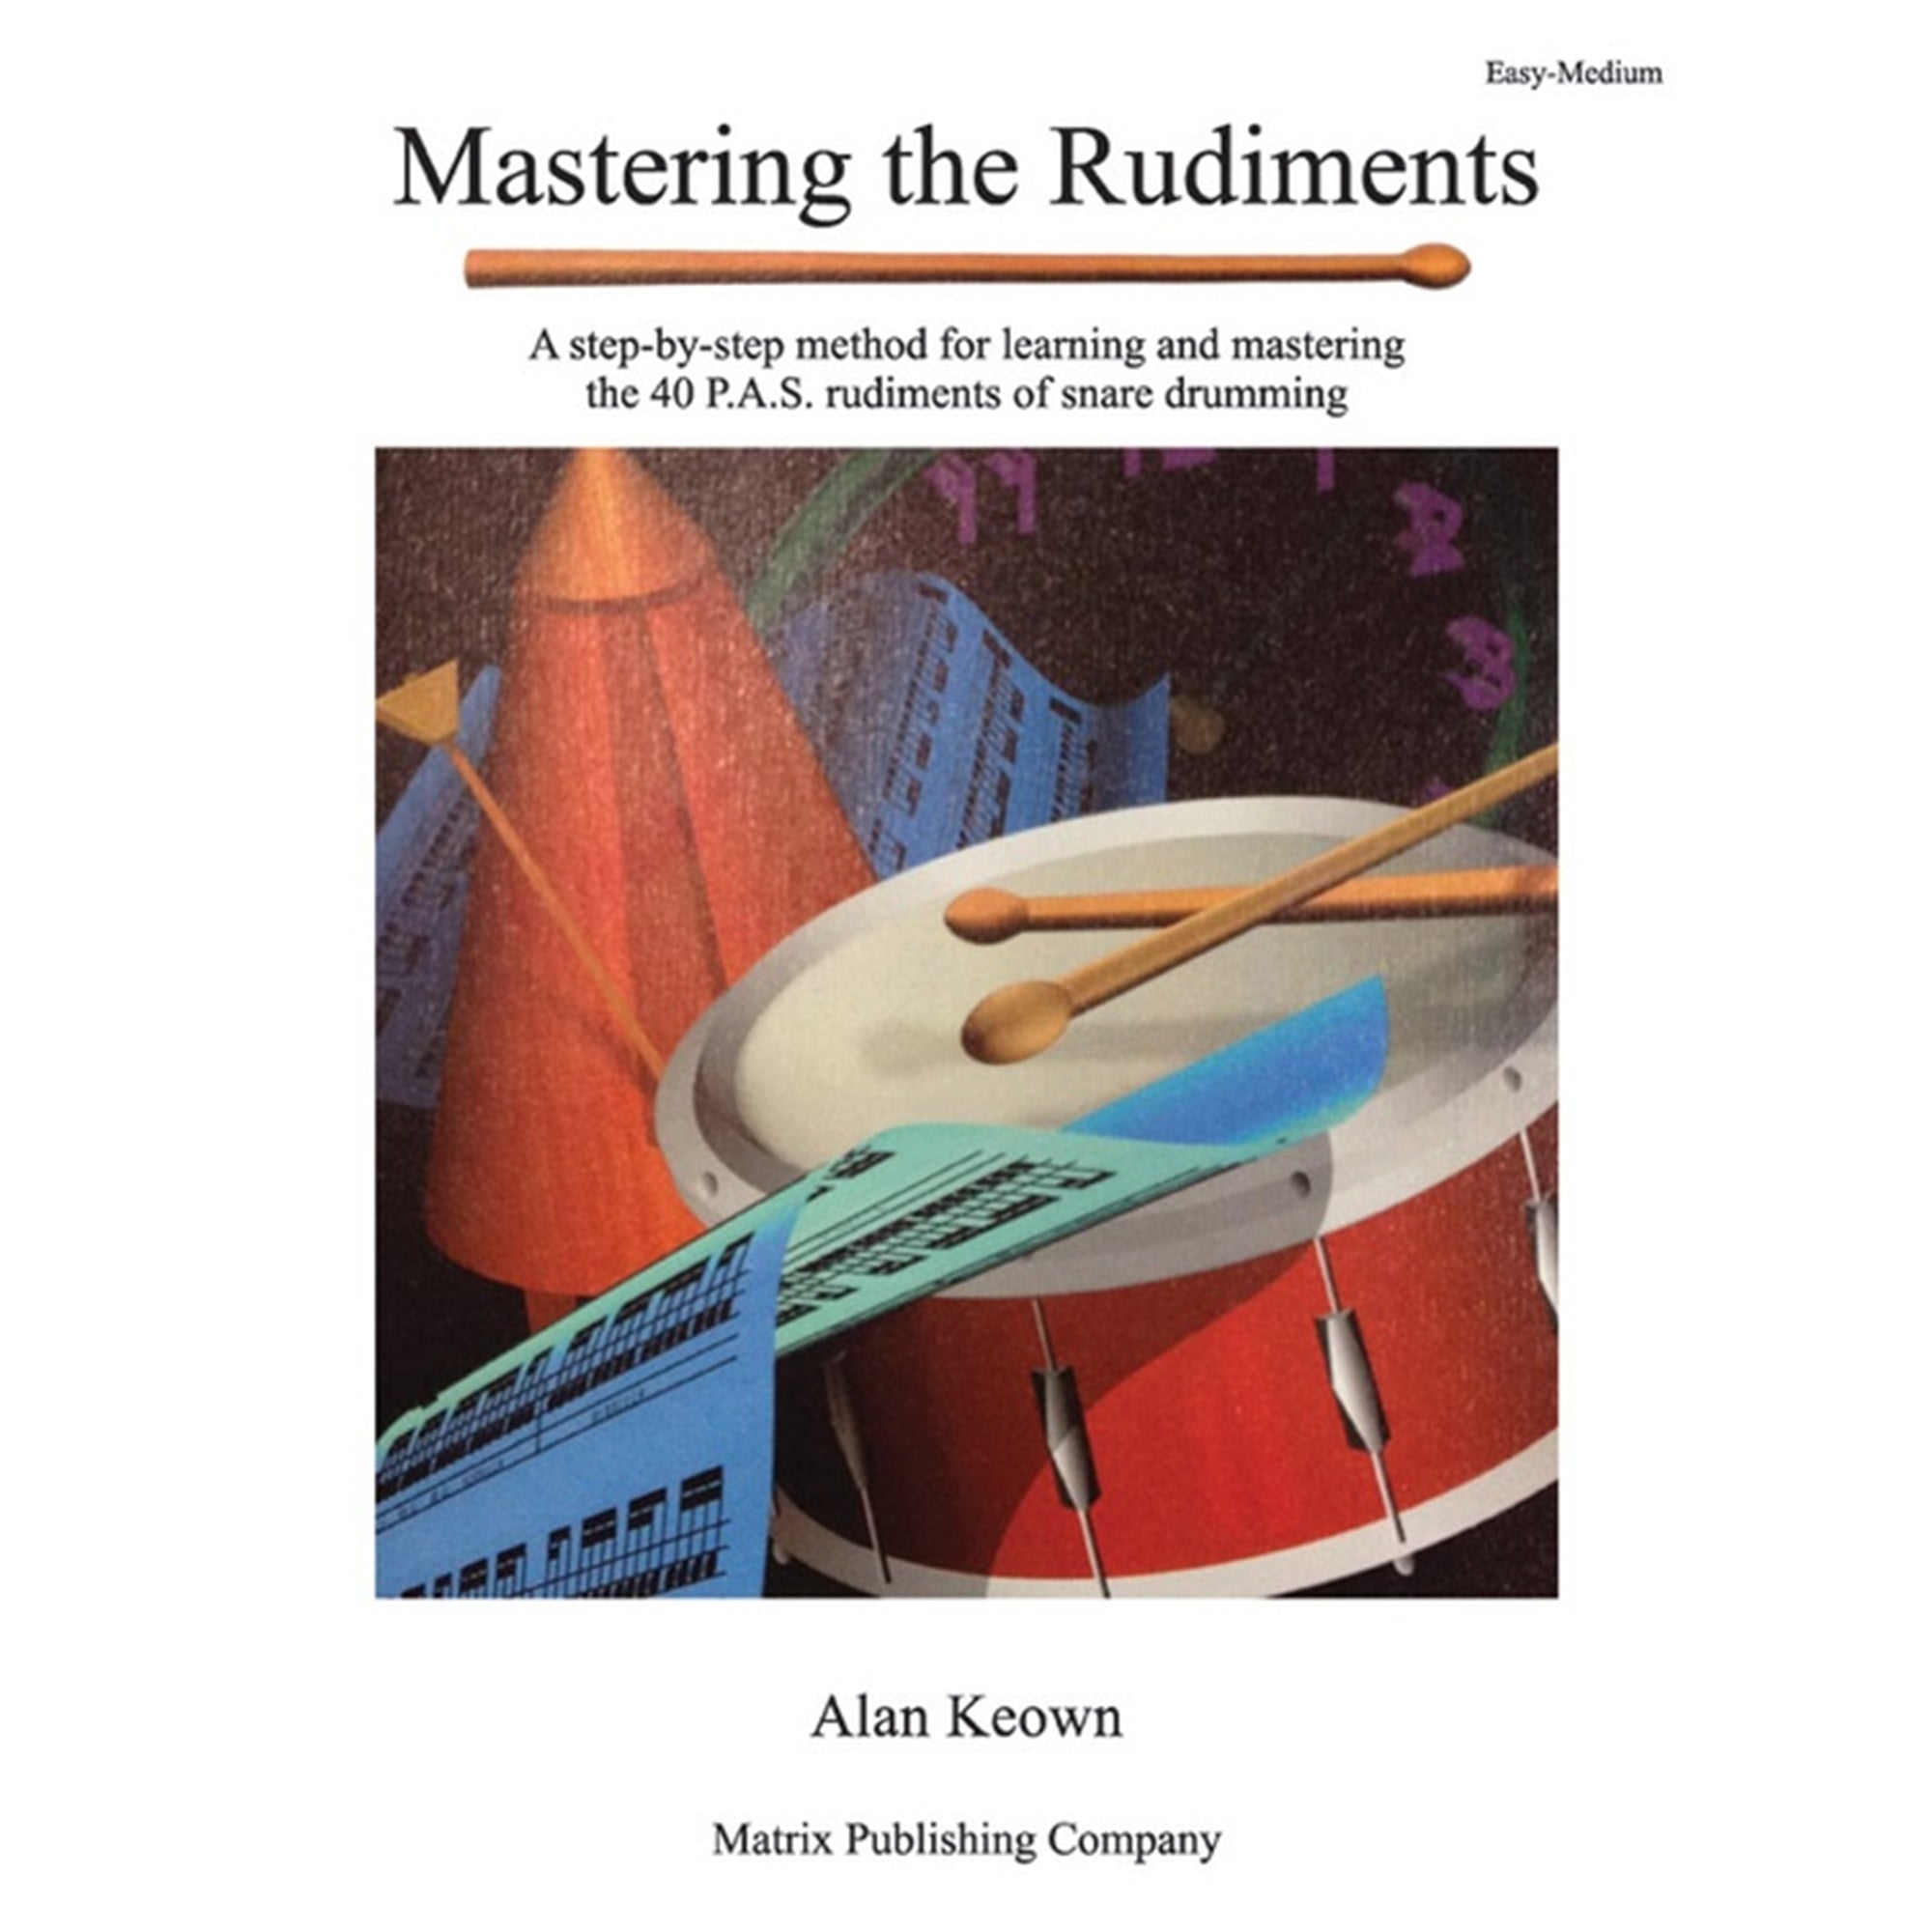 ALFRED 00SDS9 Mastering the Rudiments